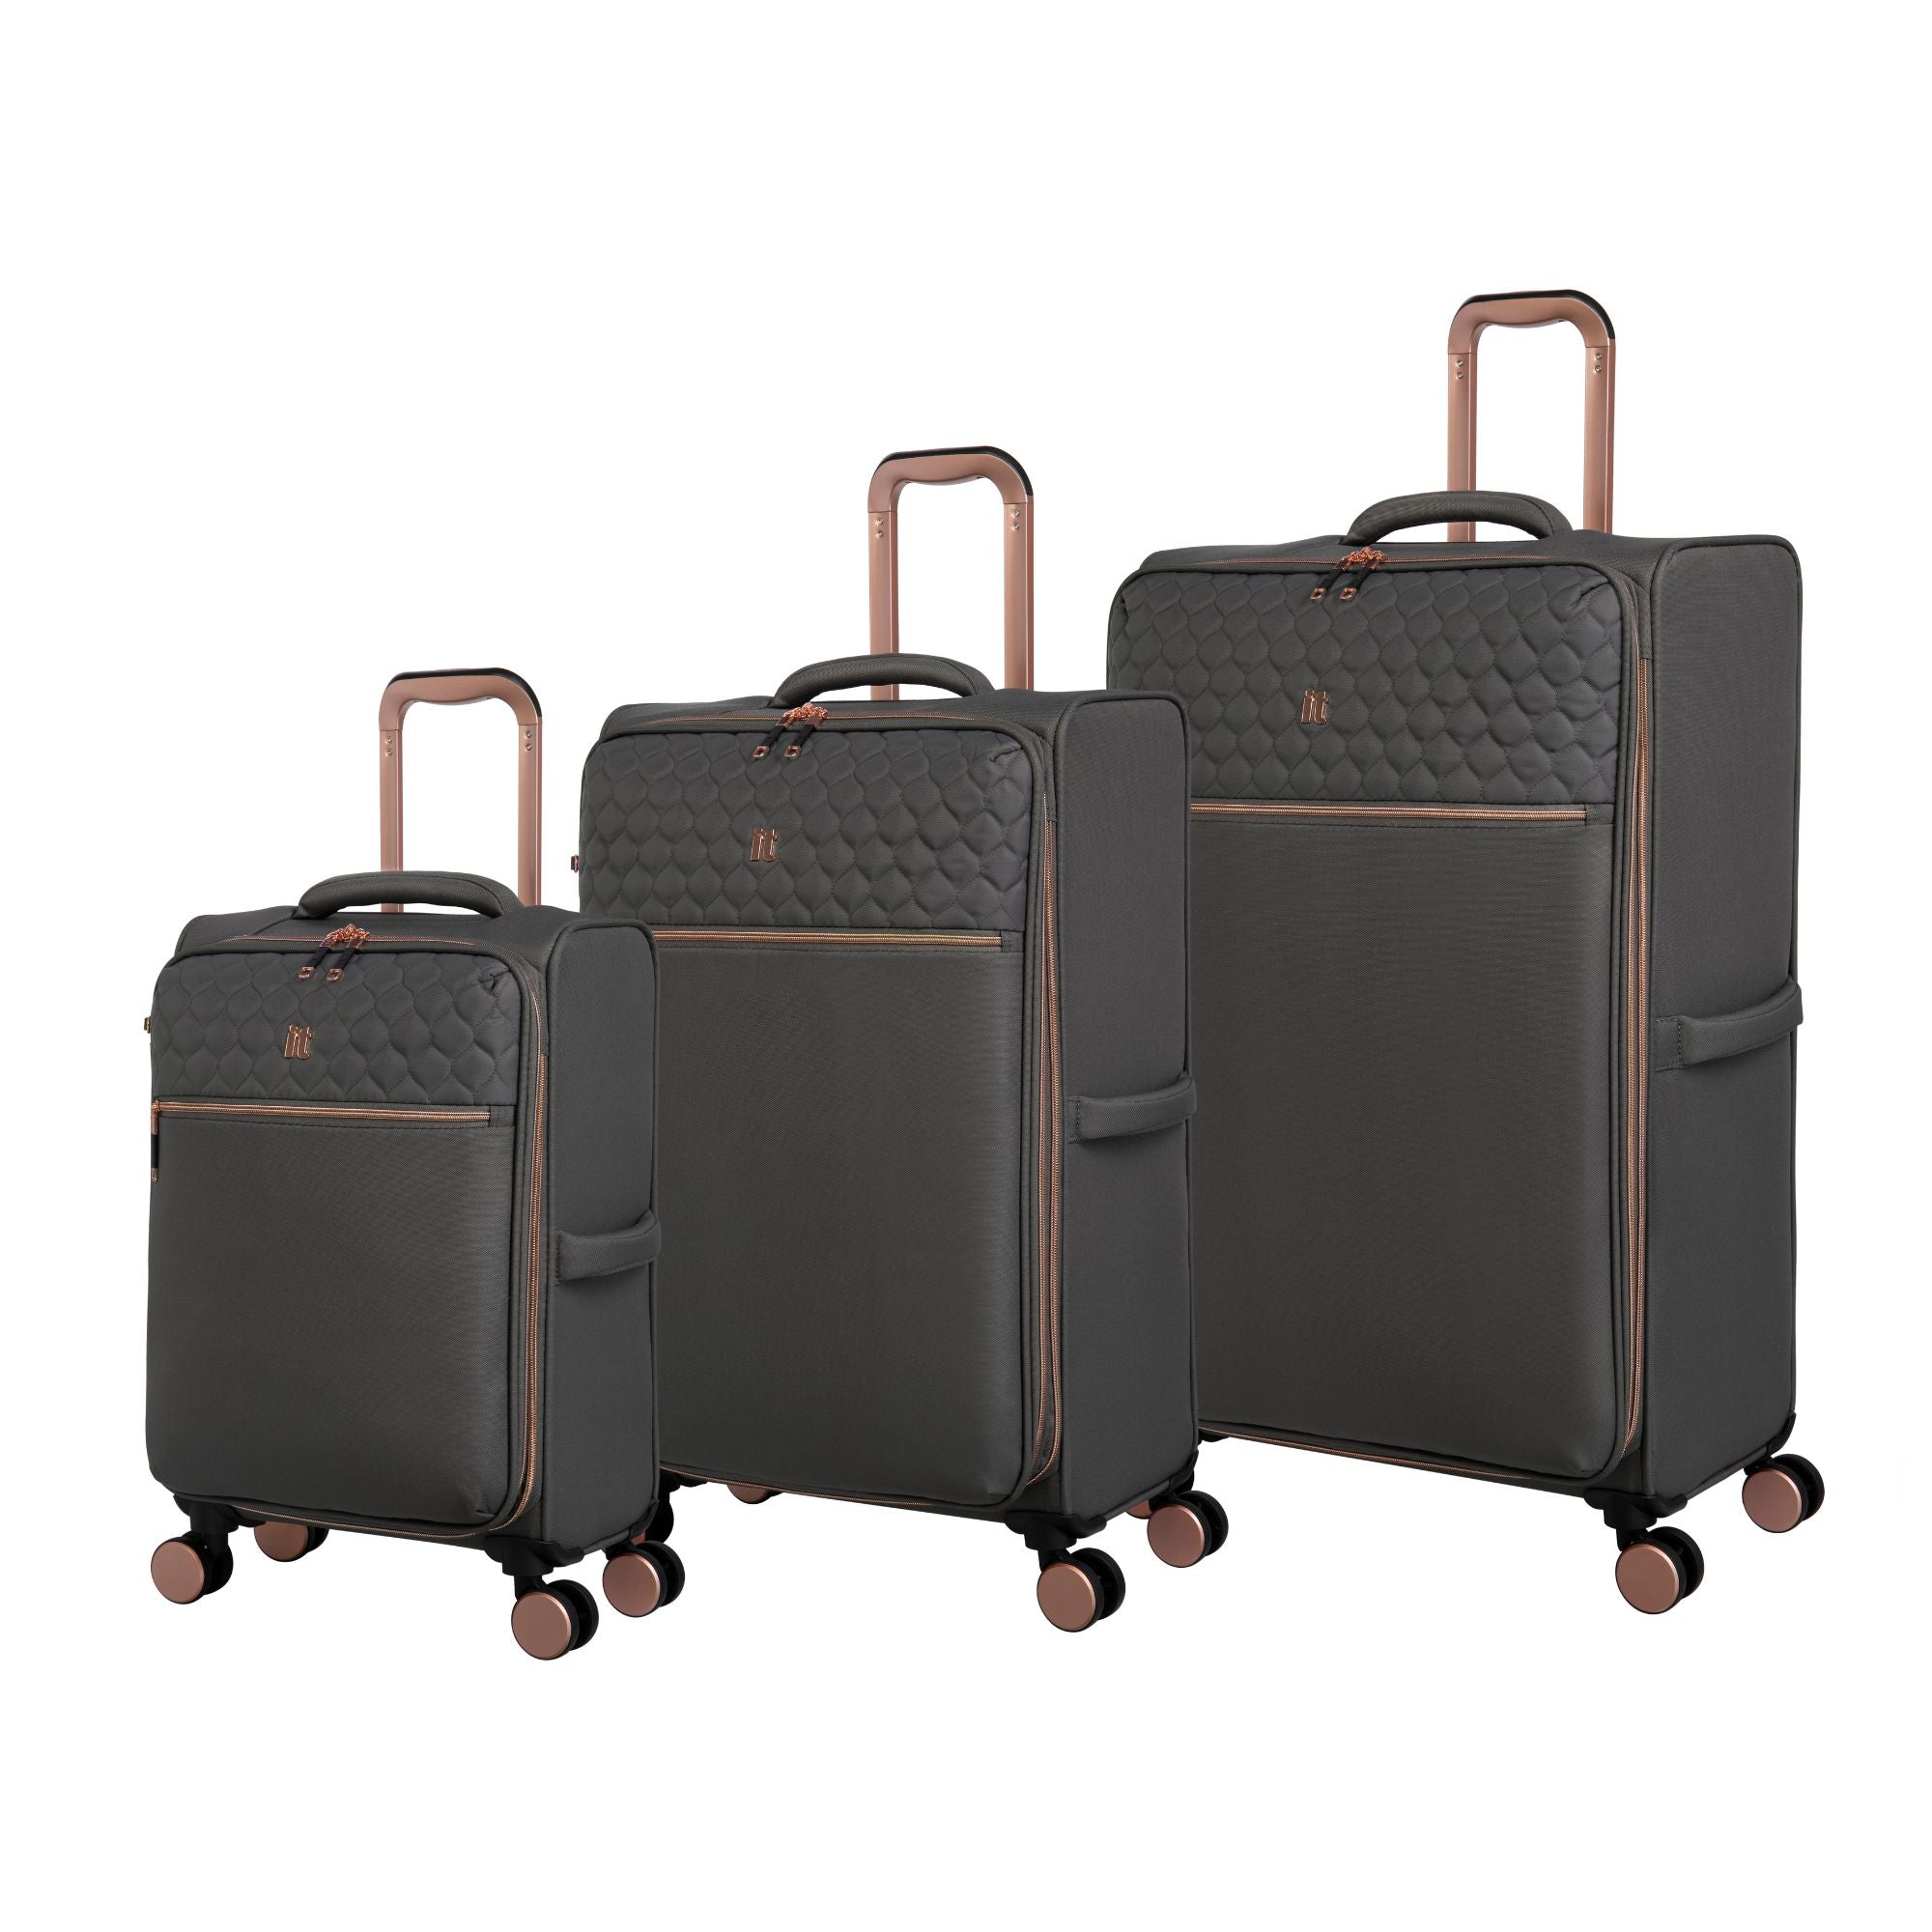 IT Luggage Suitcase Divinity - Grey and Rose Gold - 28 Inches  | TJ Hughes